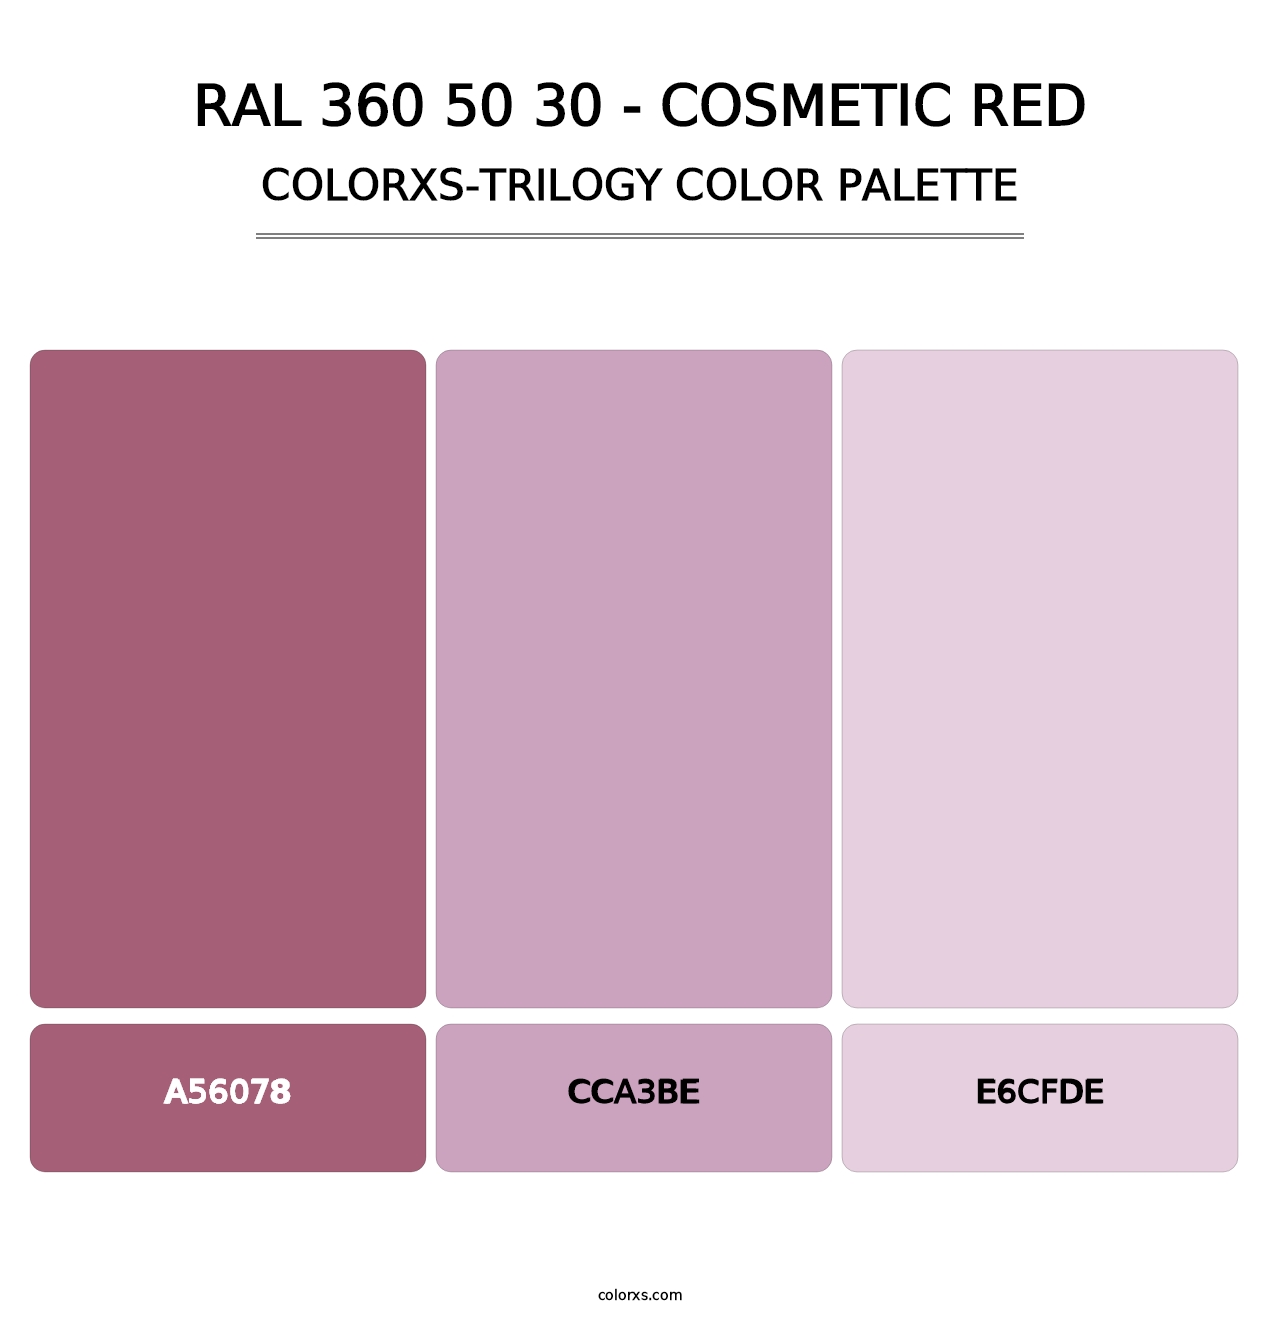 RAL 360 50 30 - Cosmetic Red - Colorxs Trilogy Palette